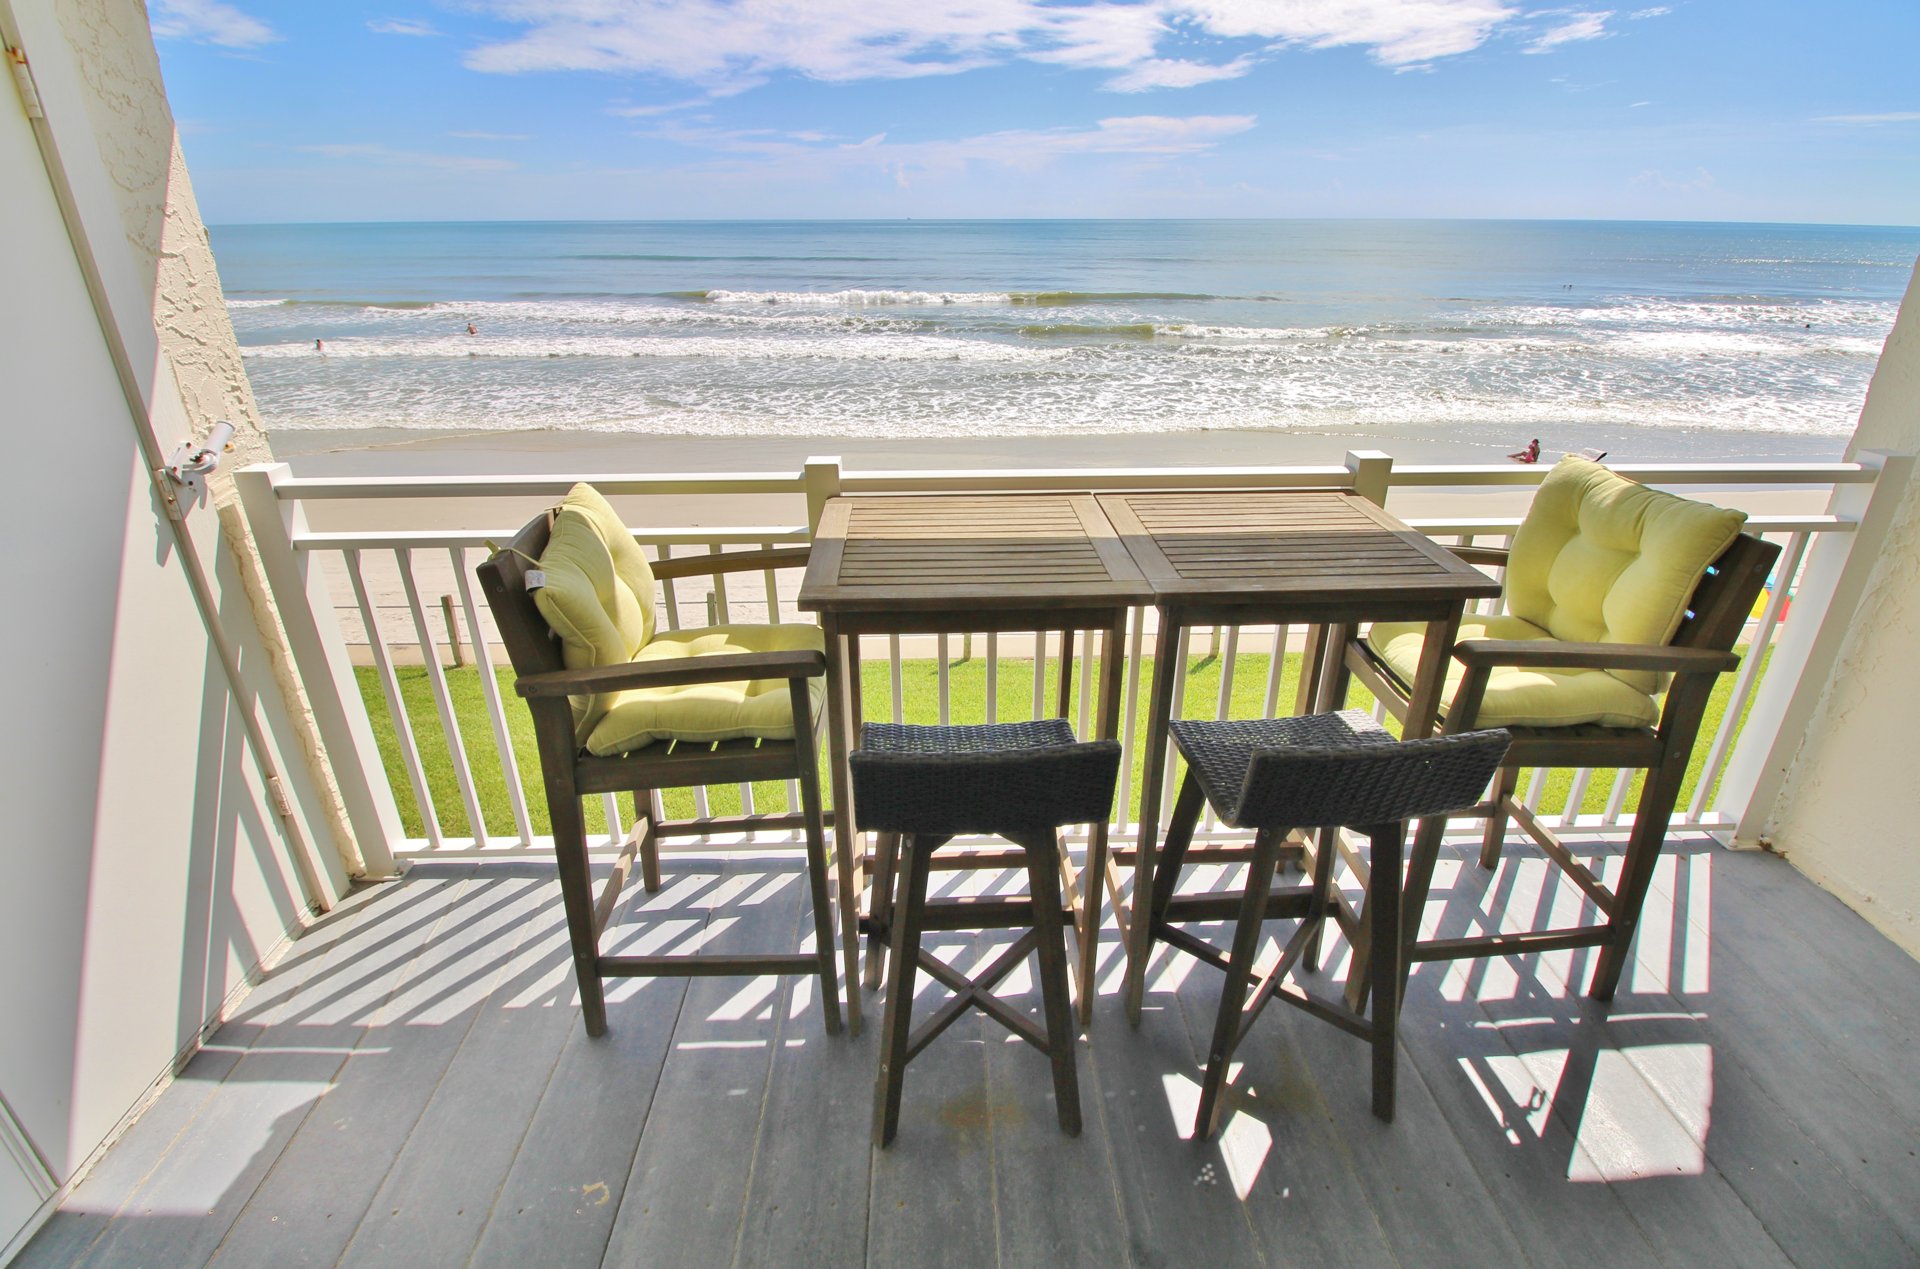 Furnished oceanfront balcony